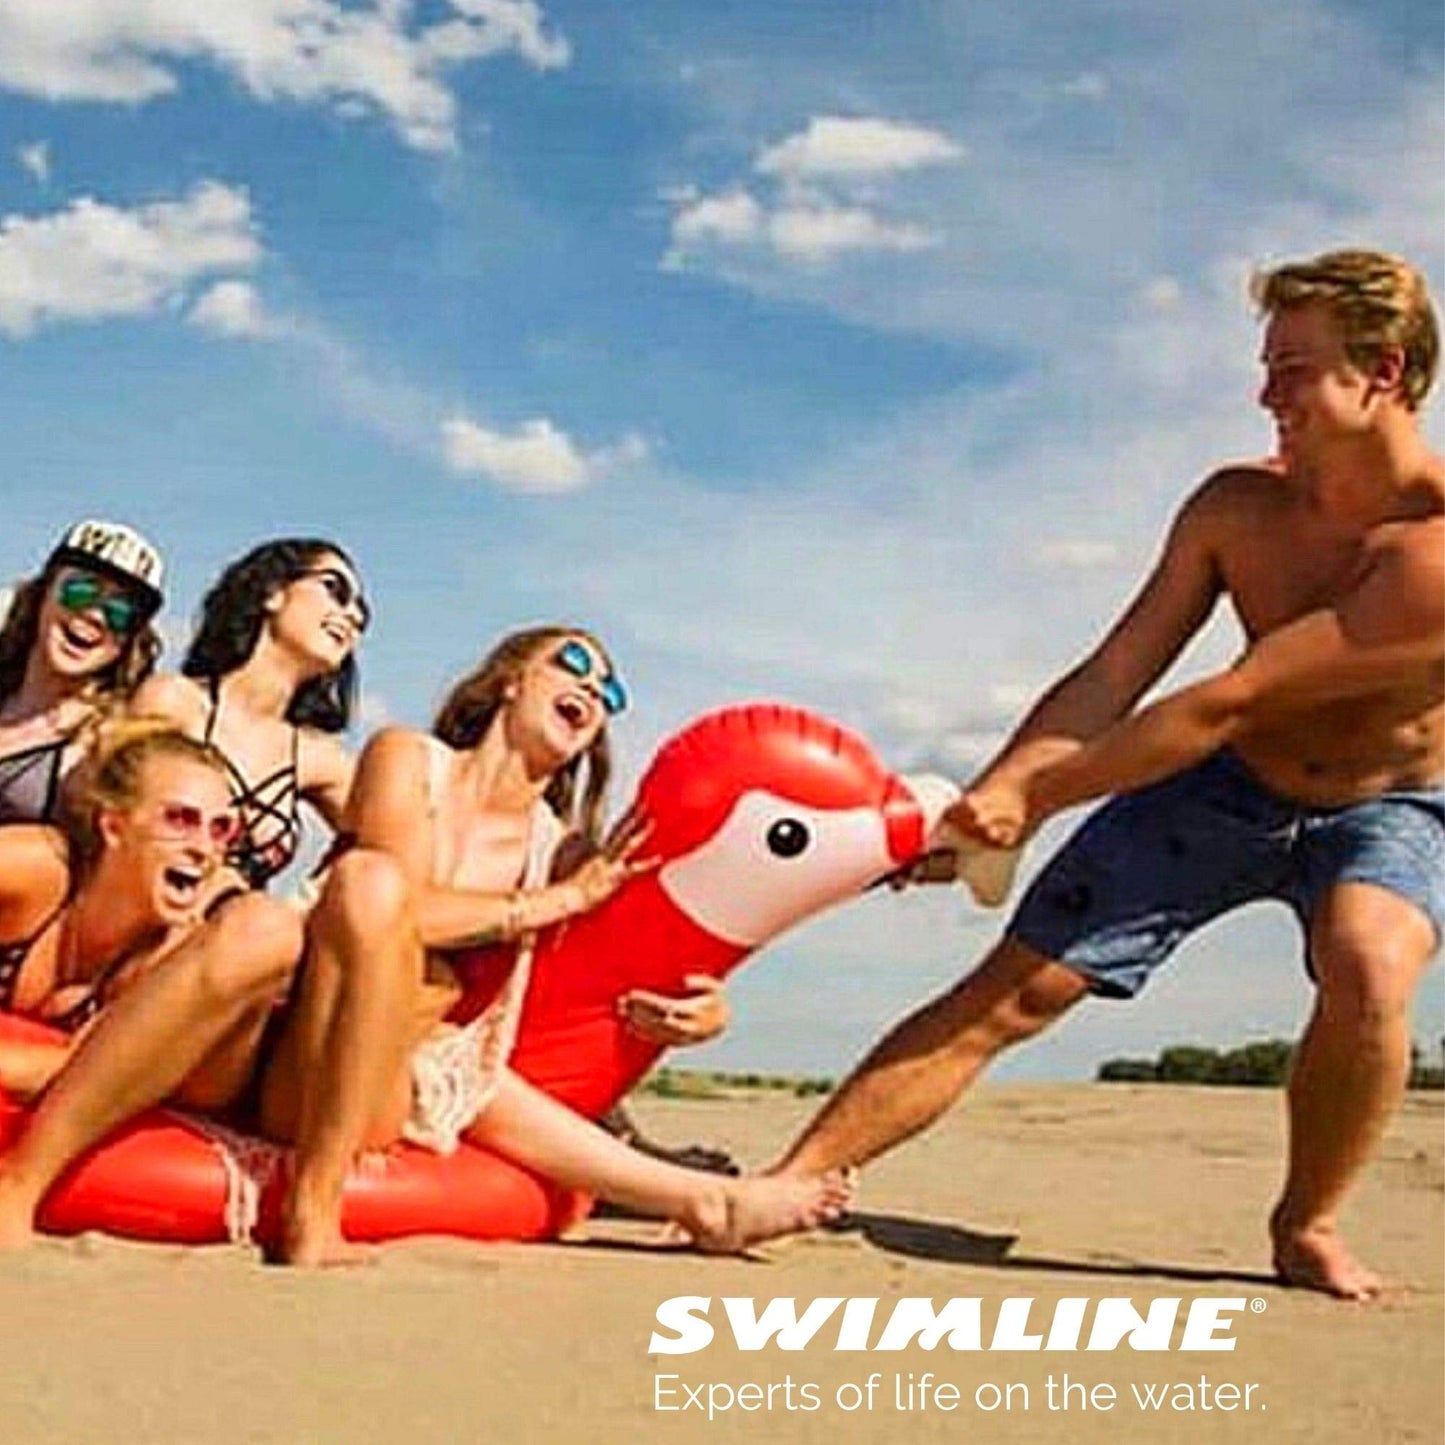 SWIMLINE Original Giant Ride On Inflatable Pool Float Lounge Series | Floaties W/Stable Legs Wings Large Rideable Blow Up Summer Beach Swimming Party Big Raft Tube Decoration Tan Toys for Kids Adults Parrot